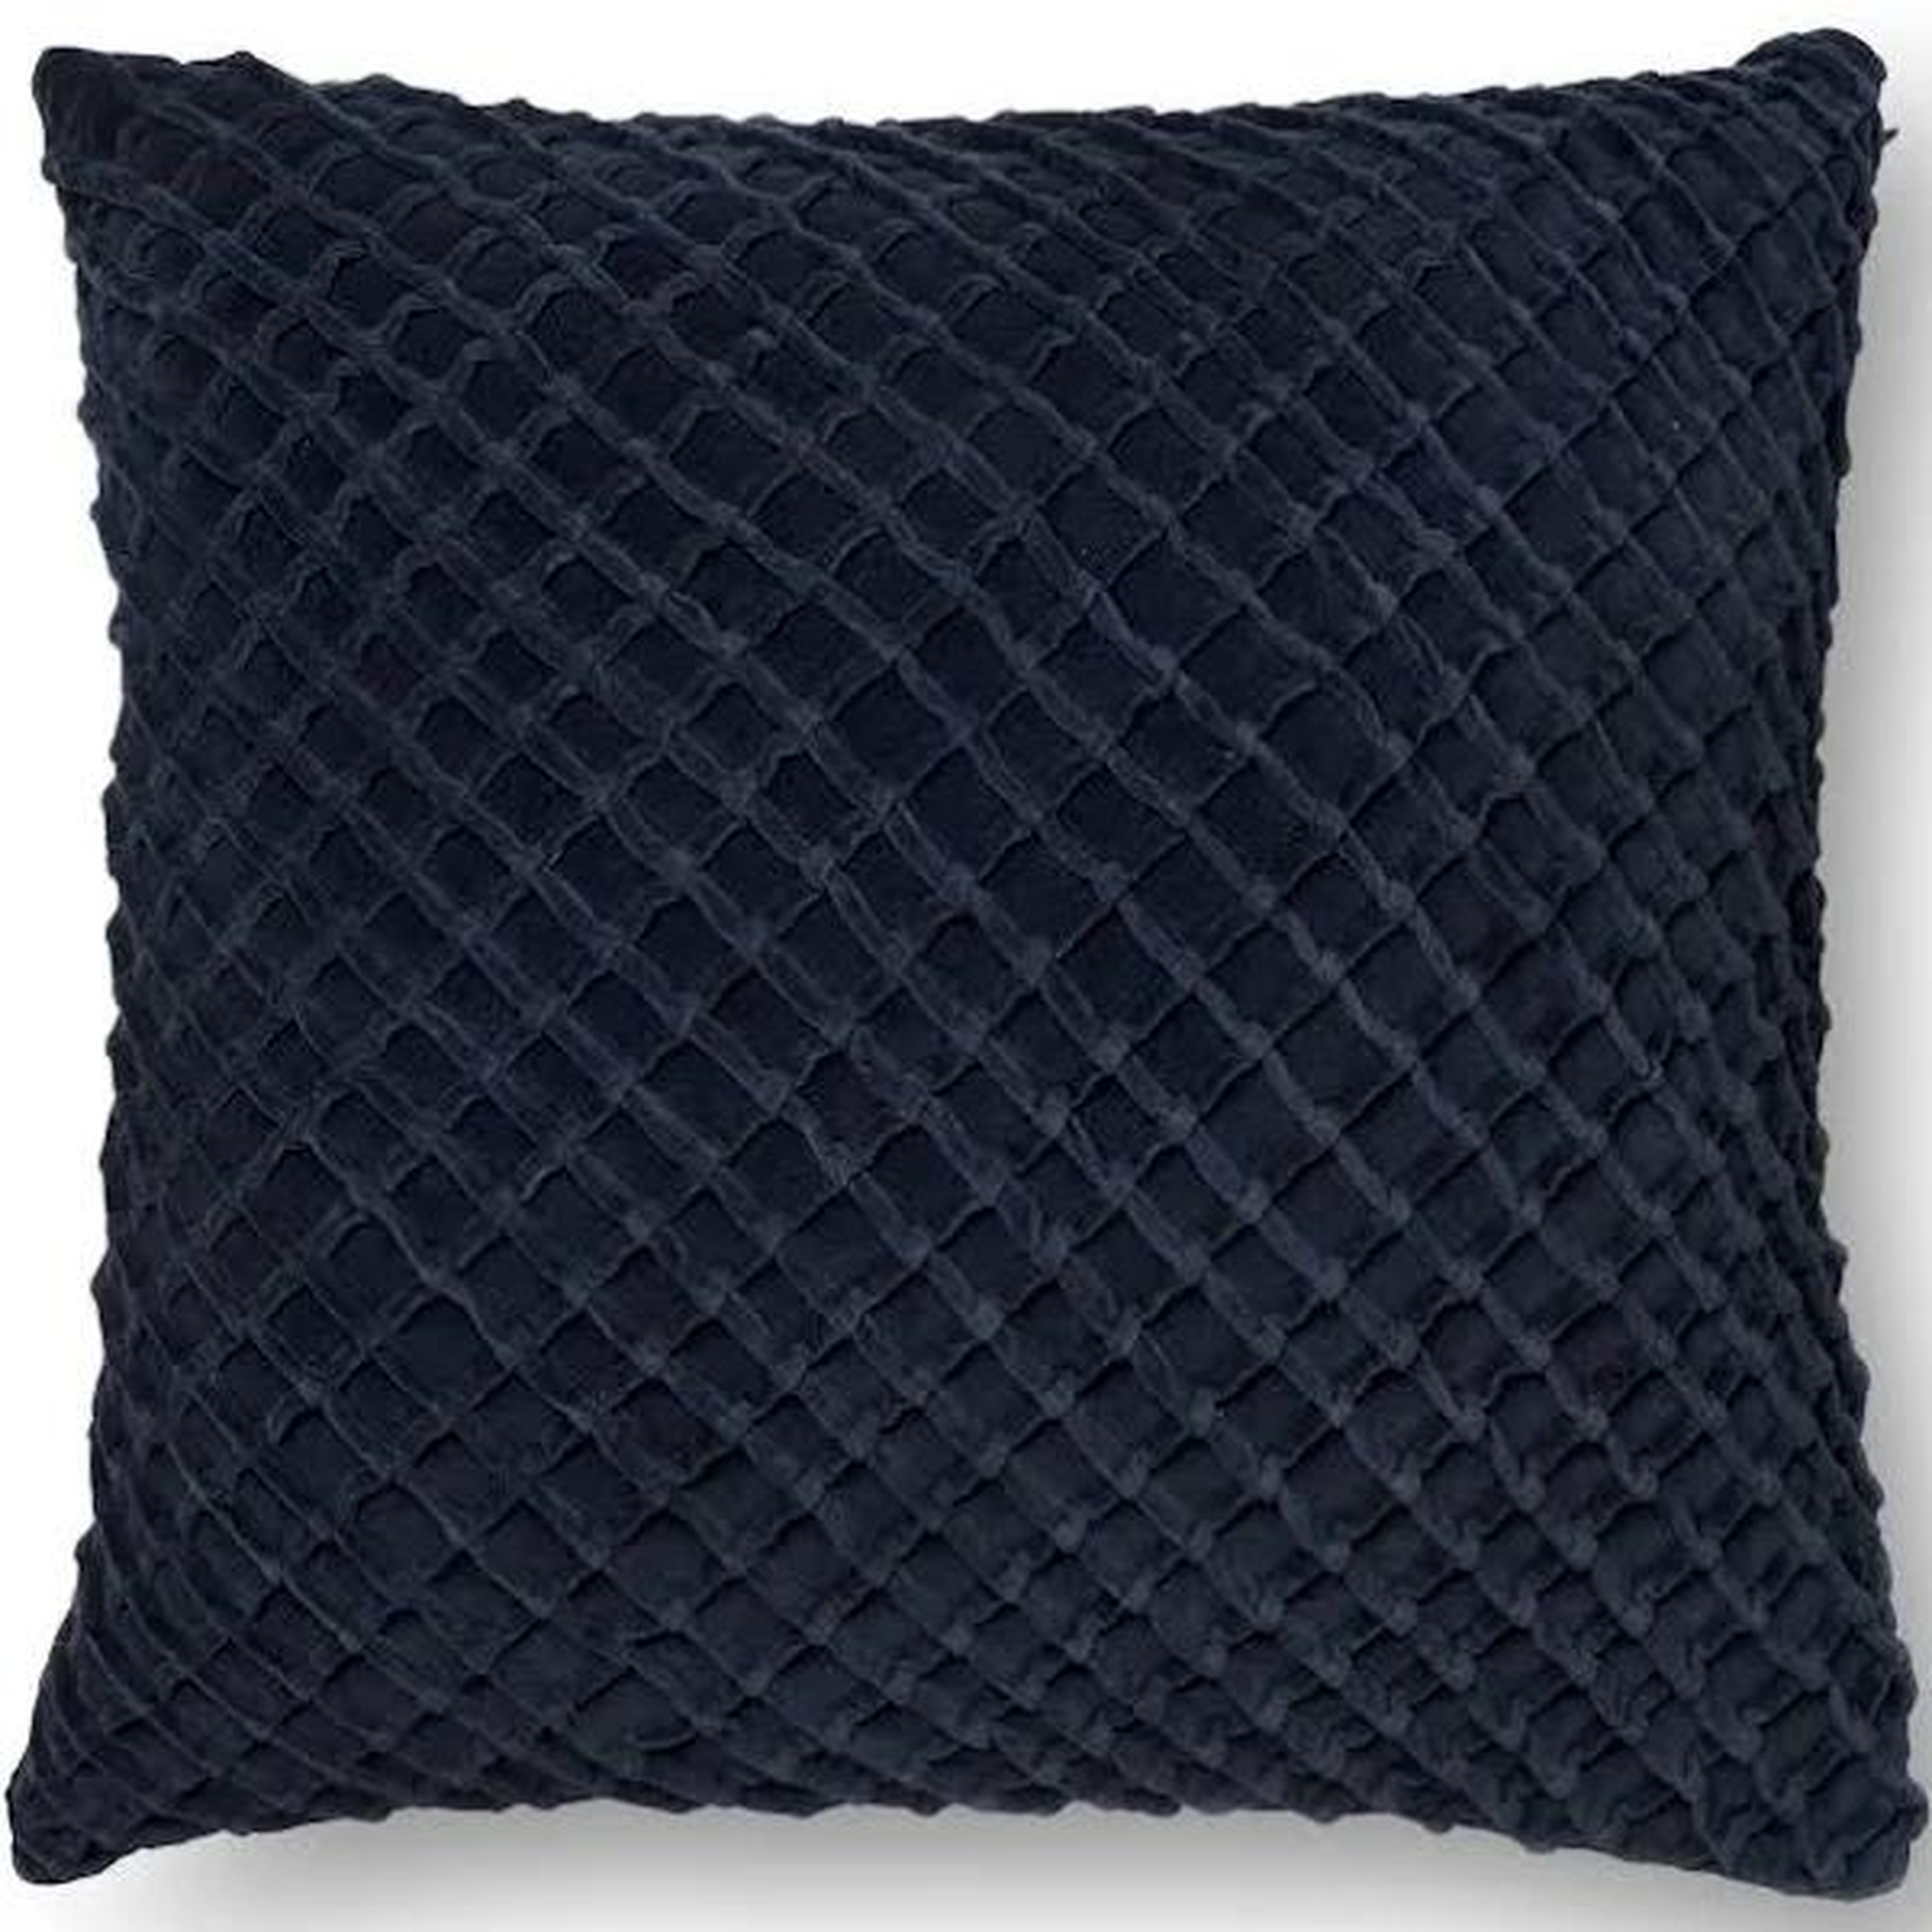 Loloi Pillows P0125 Navy 22" x 22" Cover w/Poly - Loloi Rugs